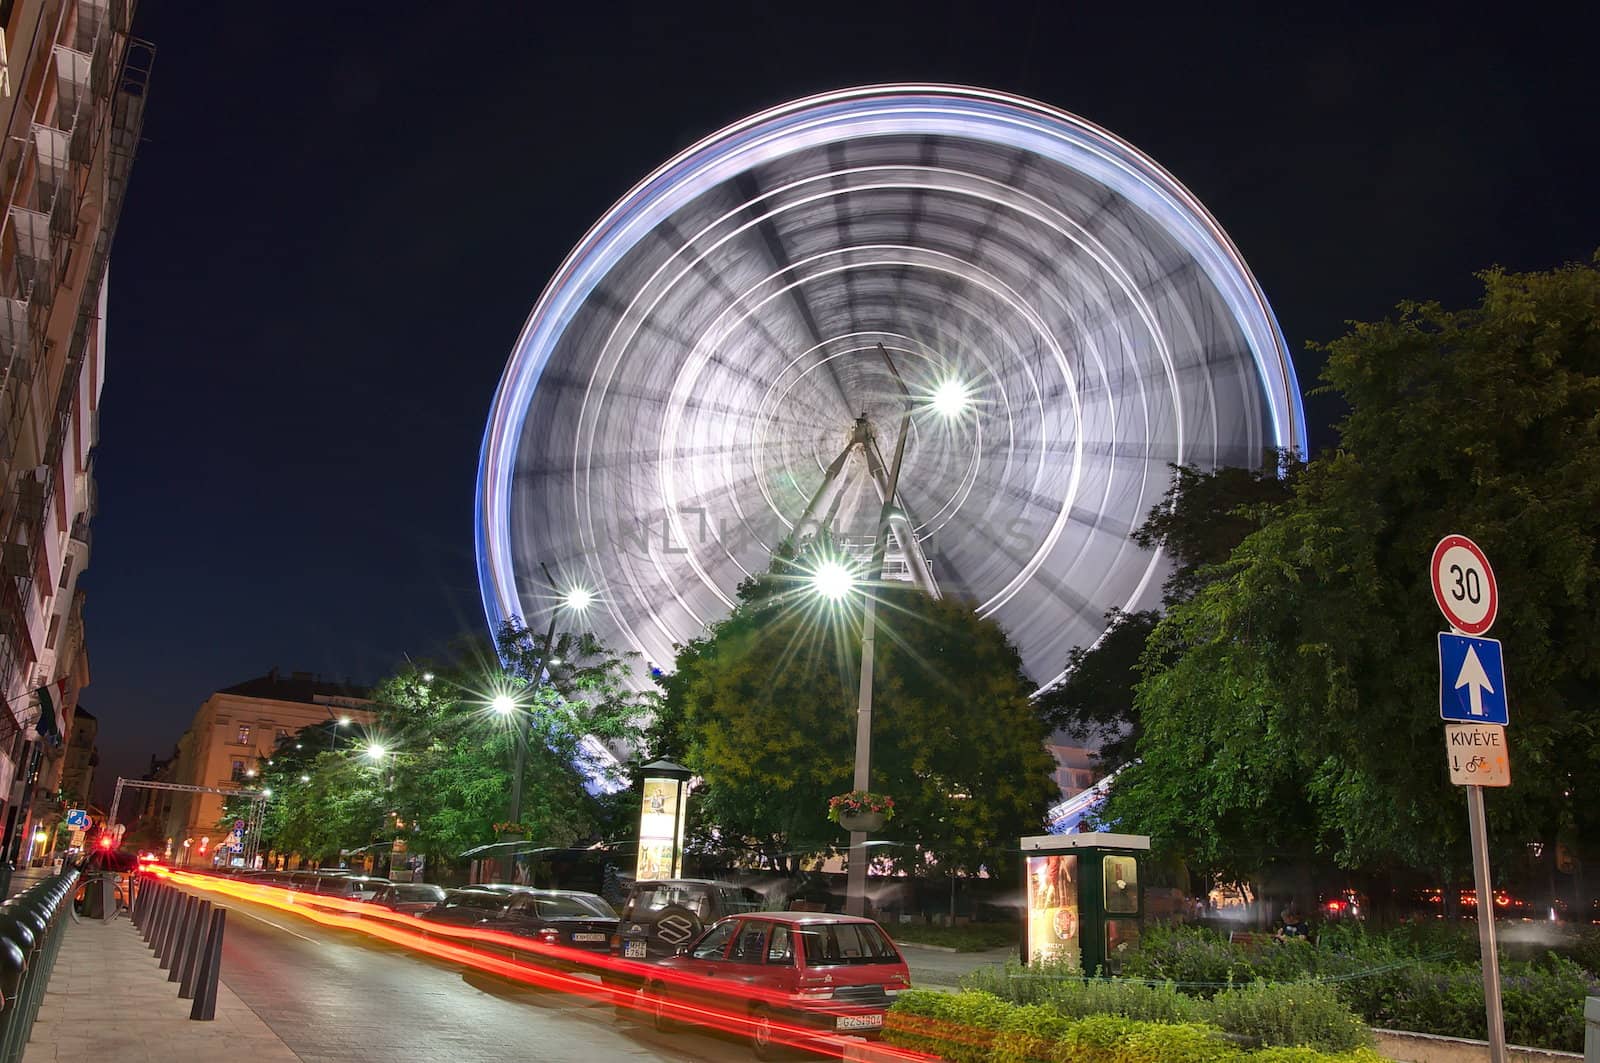 Big wheel spinning at night by anderm